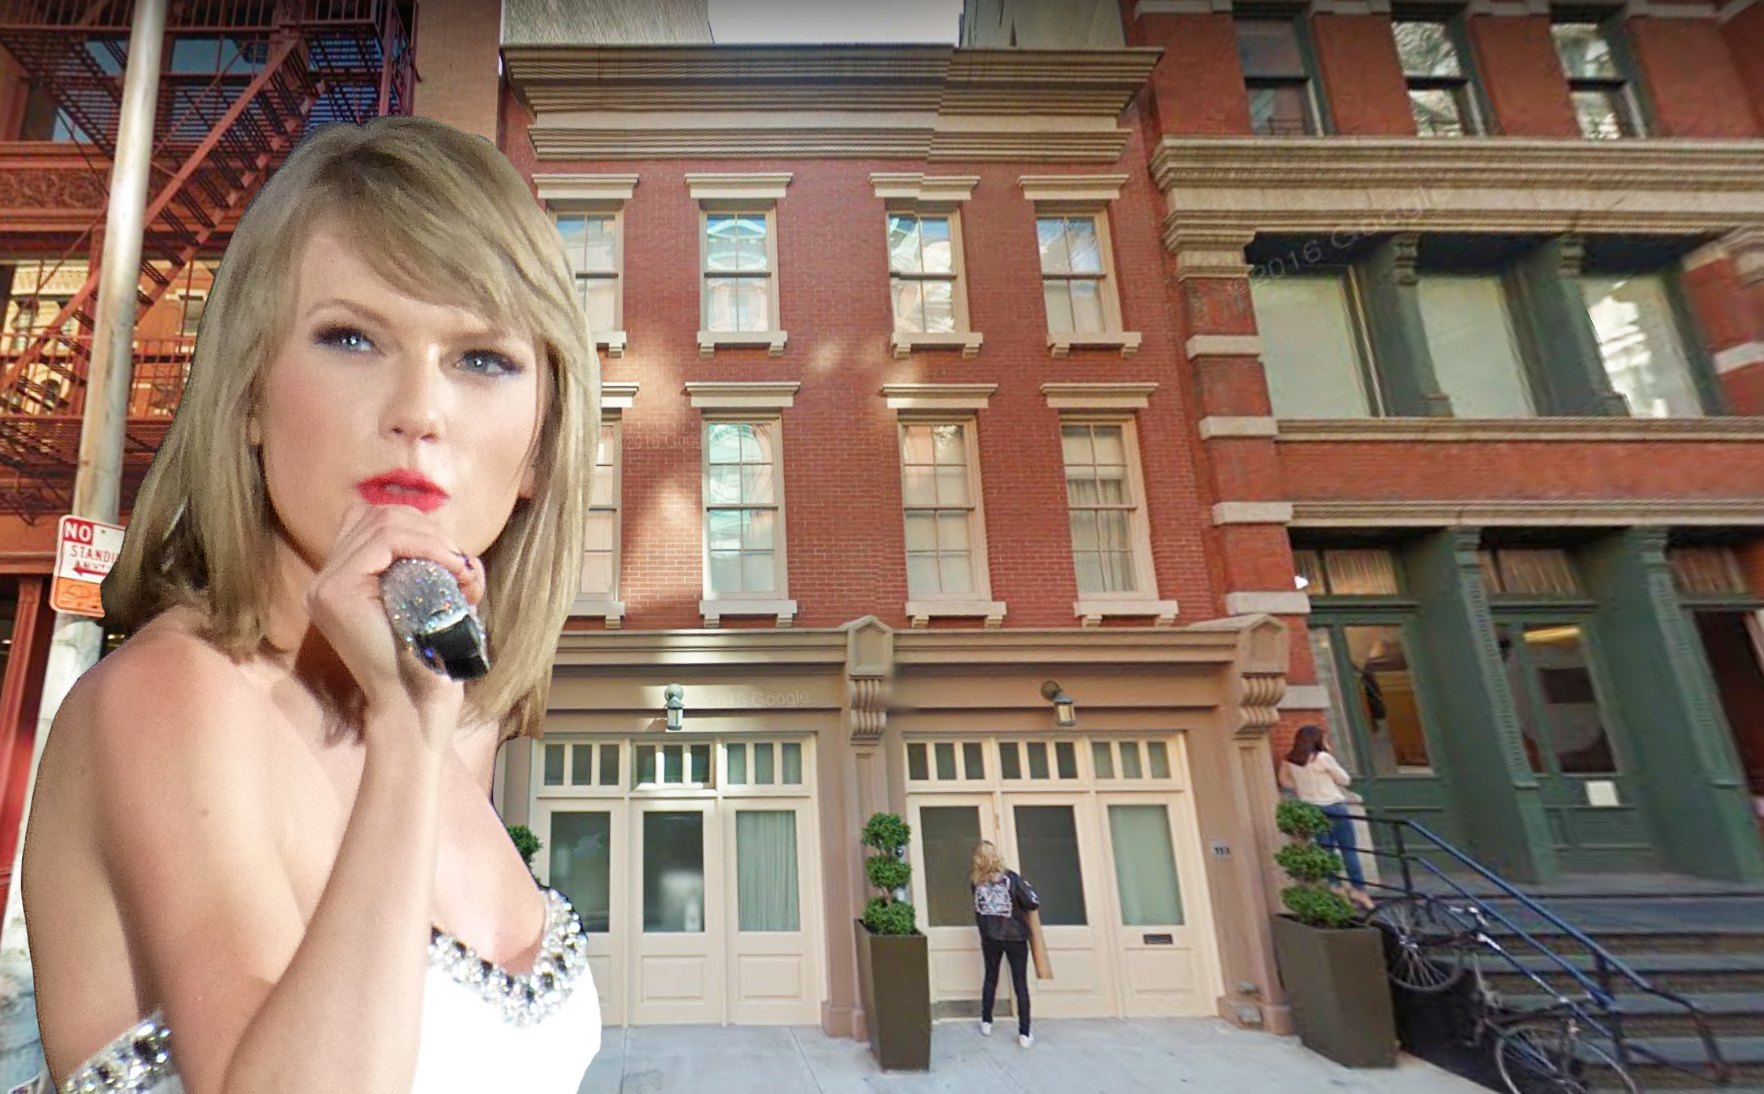 Taylor Swift might be the buyer of this $18M Tribeca townhouse